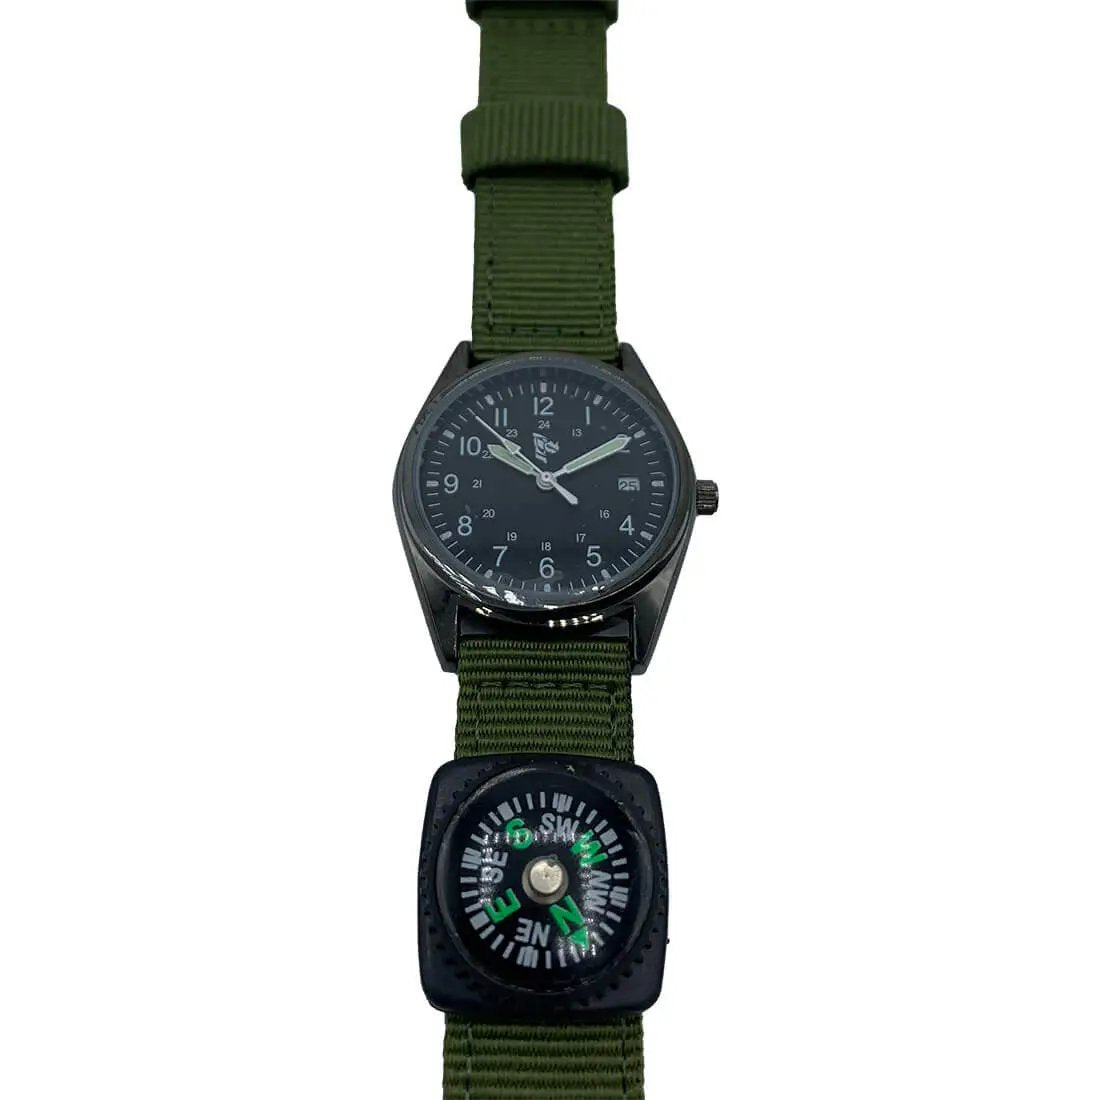 Dragon Tactical Watch with Compass - John Bull Clothing